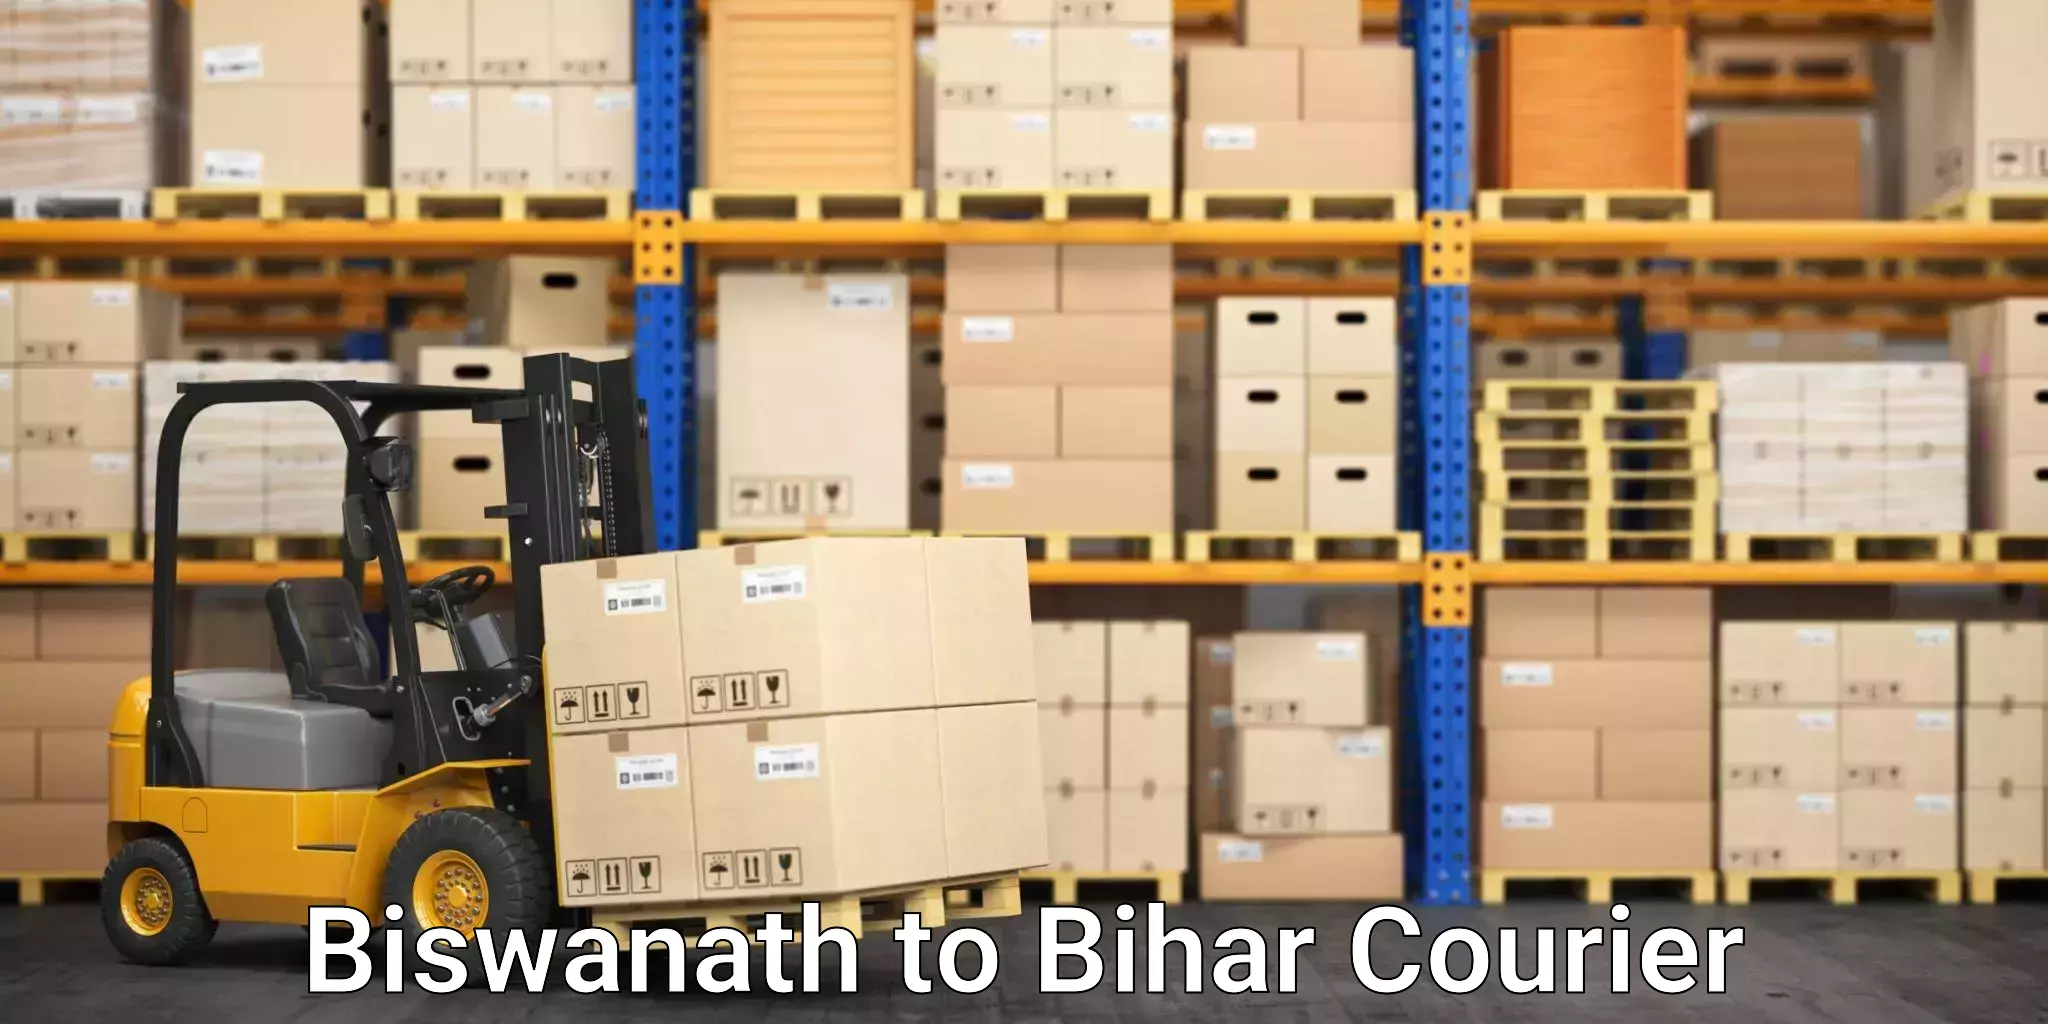 Courier service comparison Biswanath to Supaul